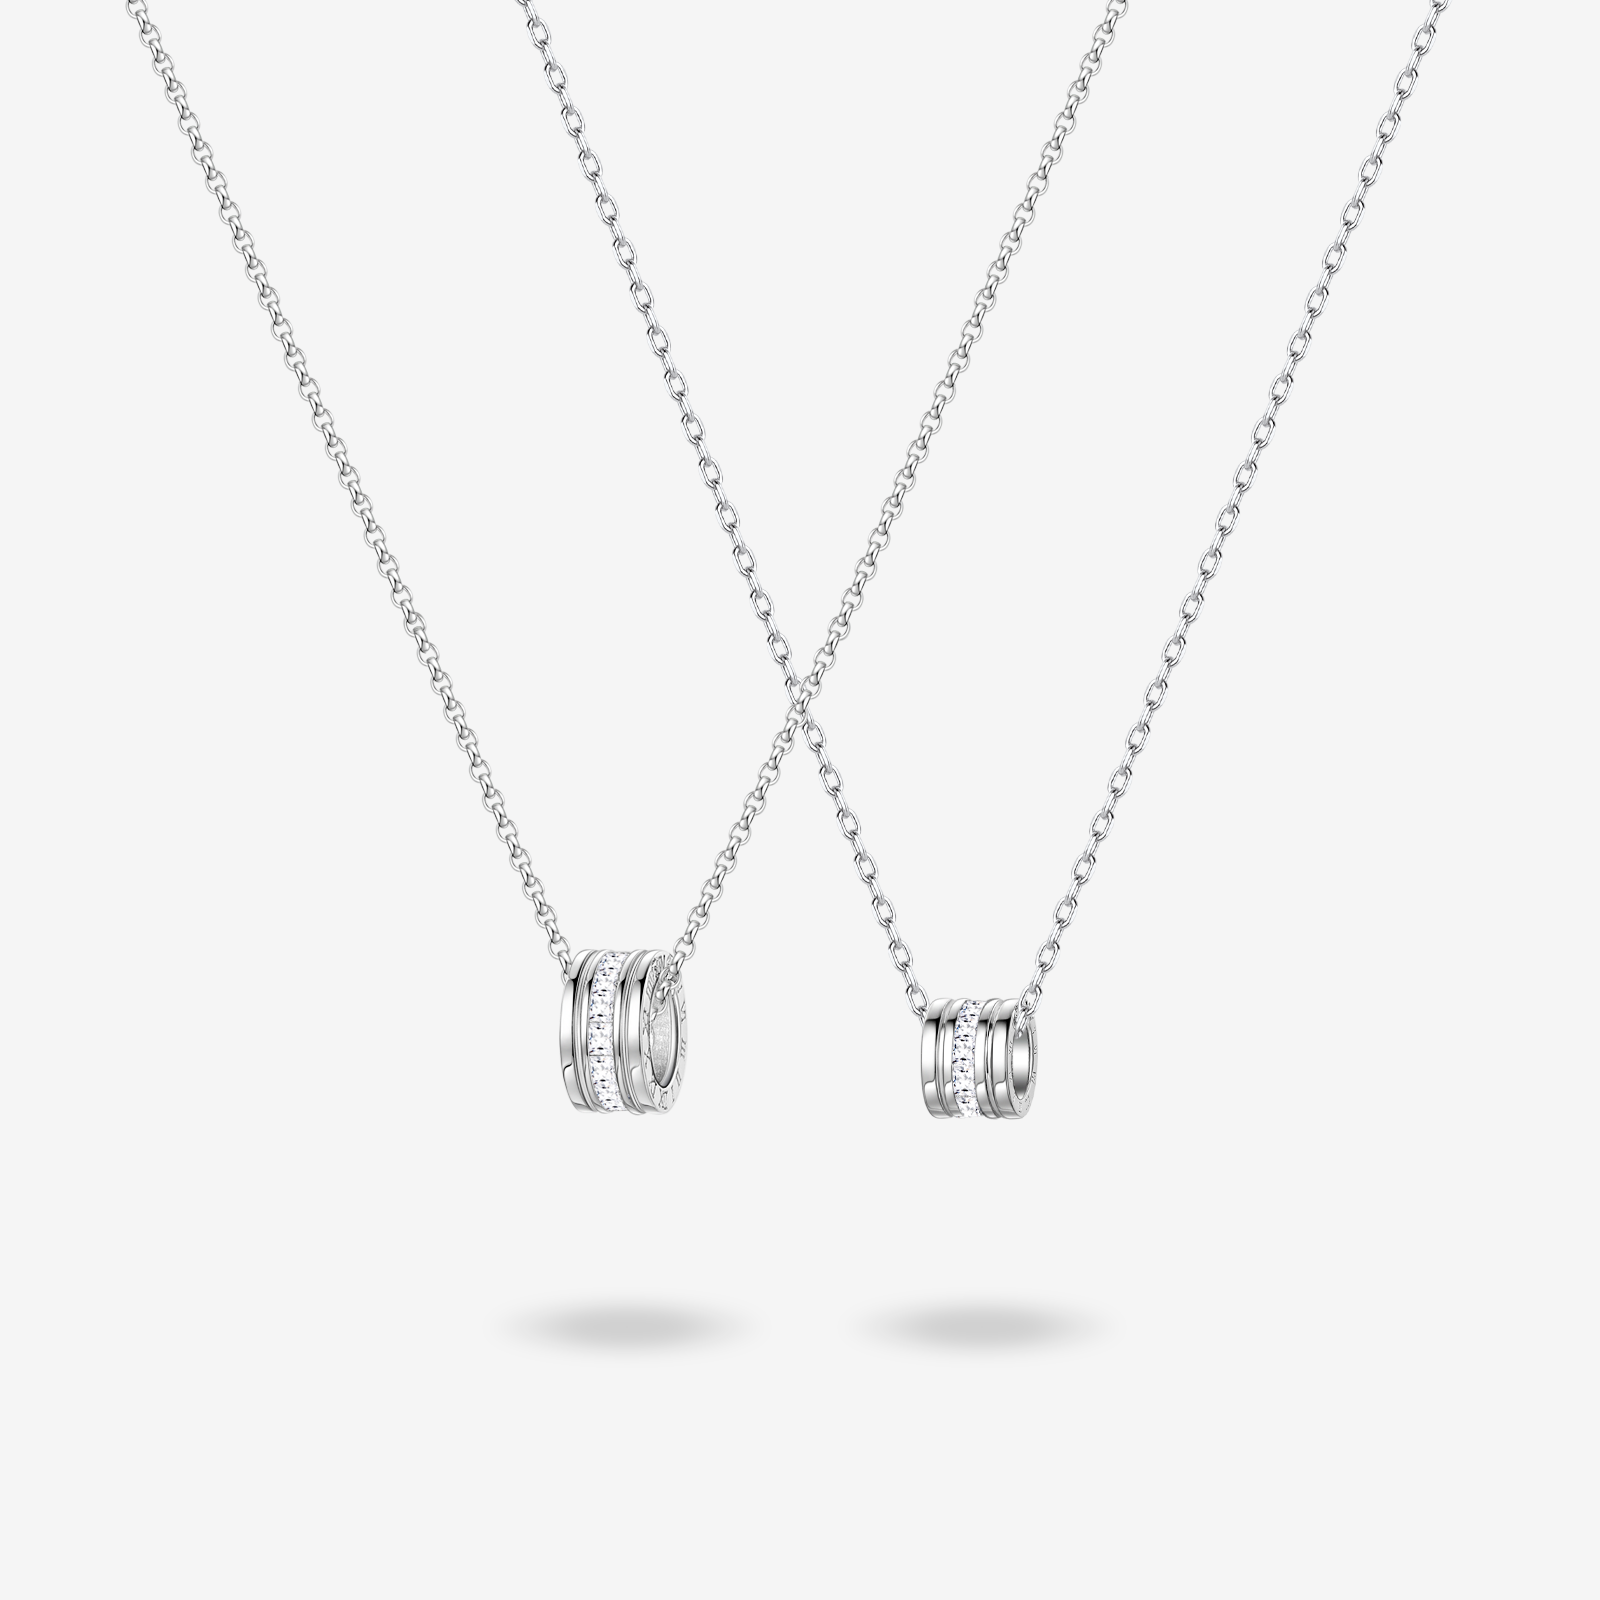 "Our Commitment" Matching Ring Sterling Silver Necklaces